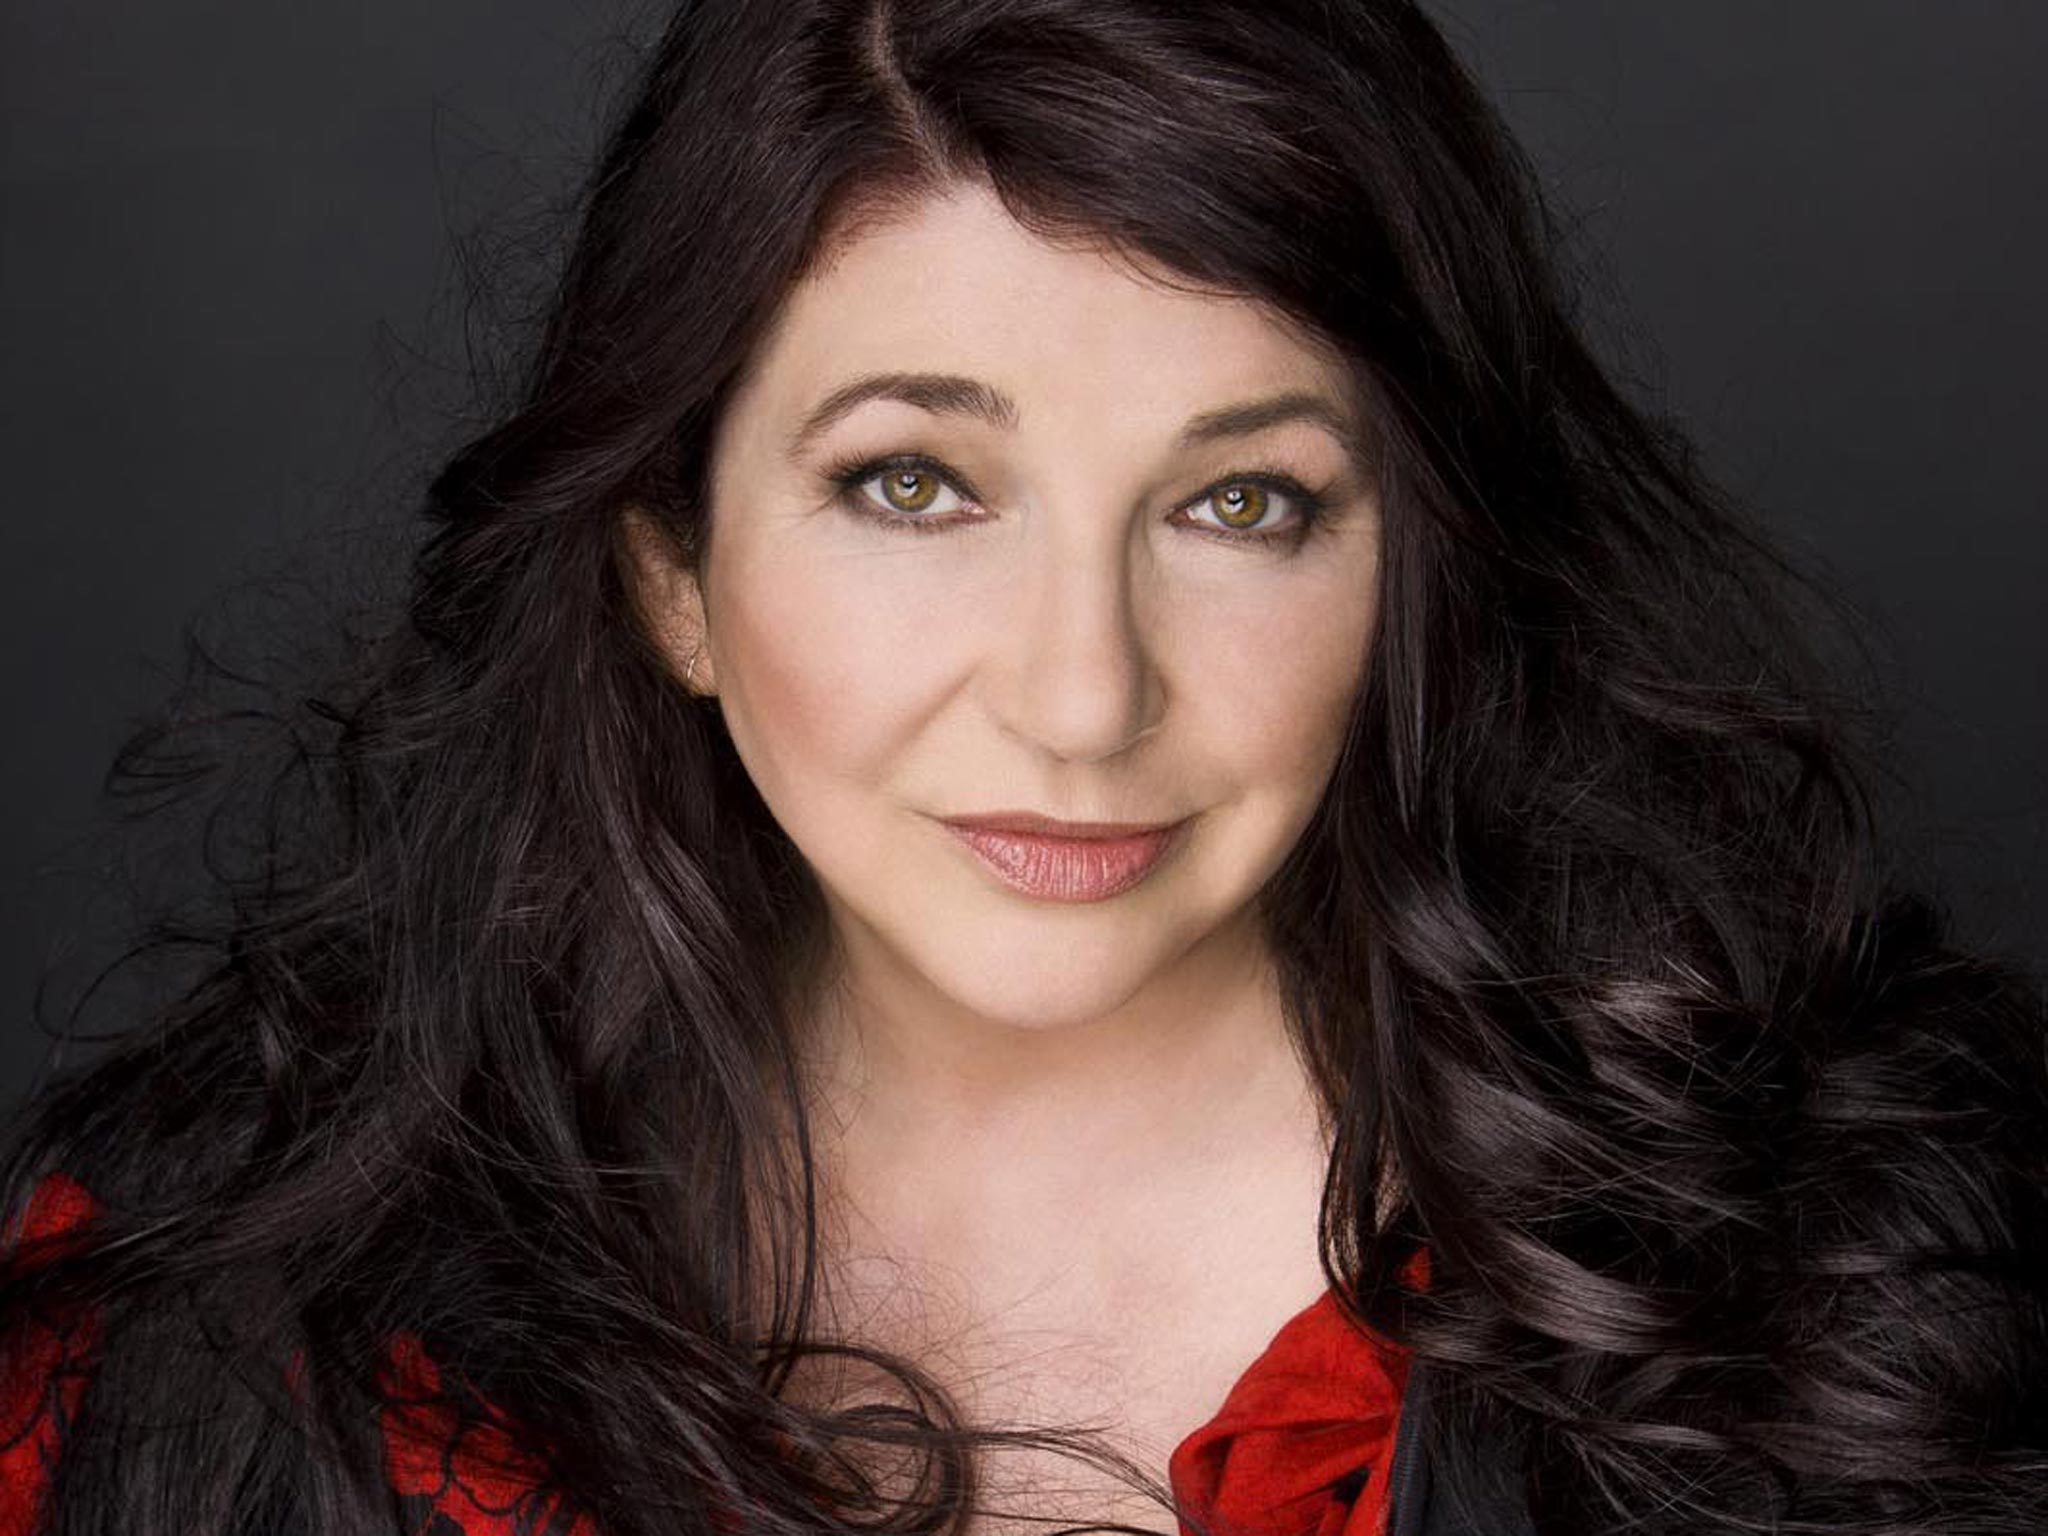 Kate Bush will perform her first of 22 dates at London's Hammersmith on 26 August